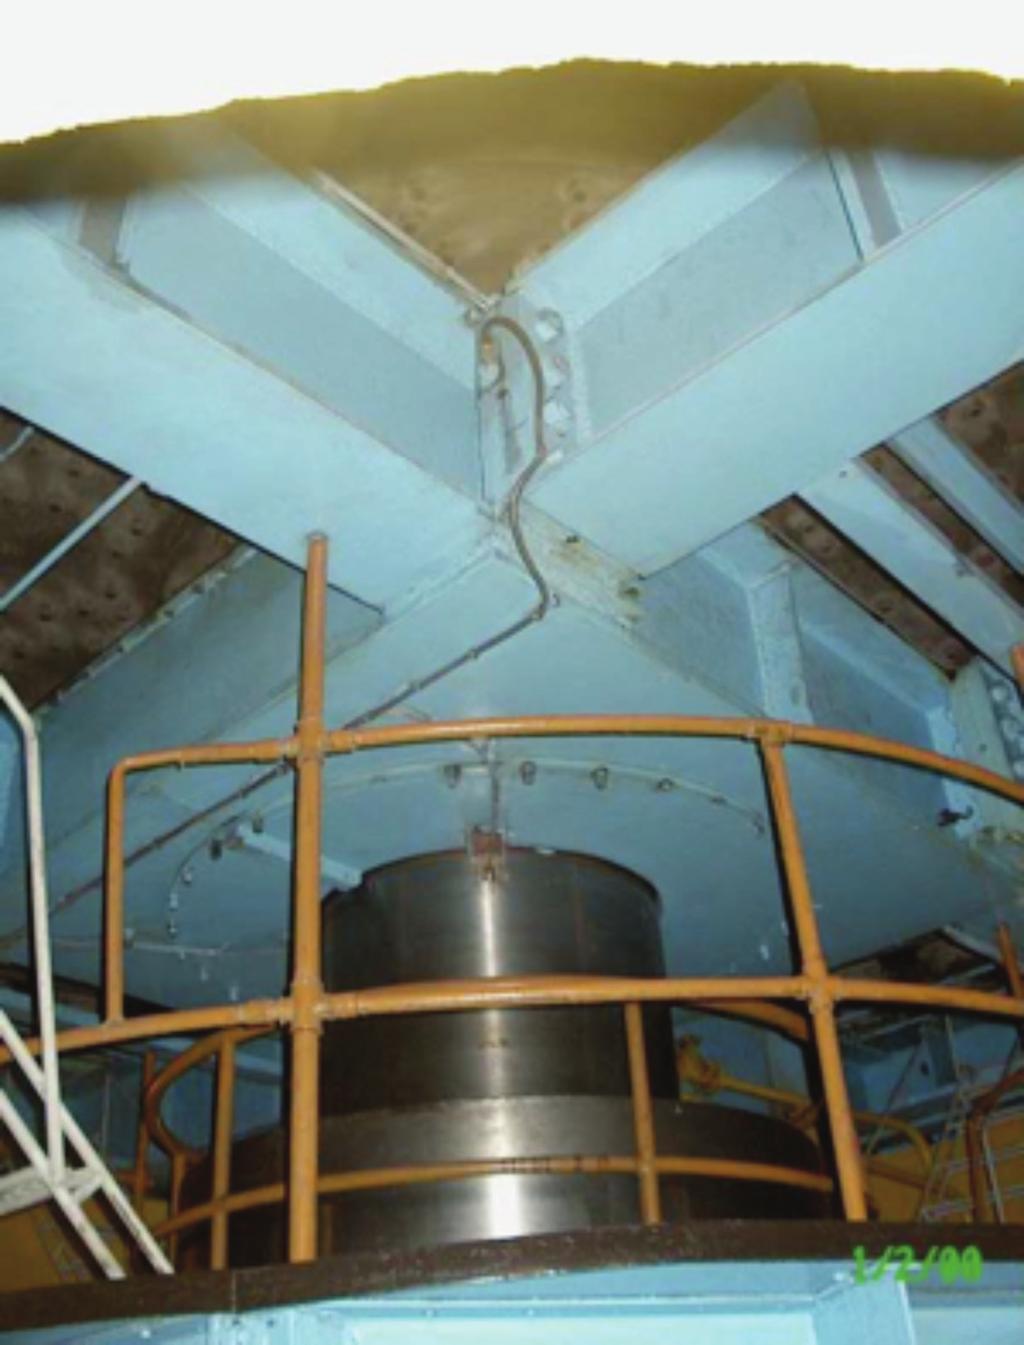 The photo in Figure 6 shows an example of two transducers that were installed in conjunction on a 100 MW hydro turbine generator.